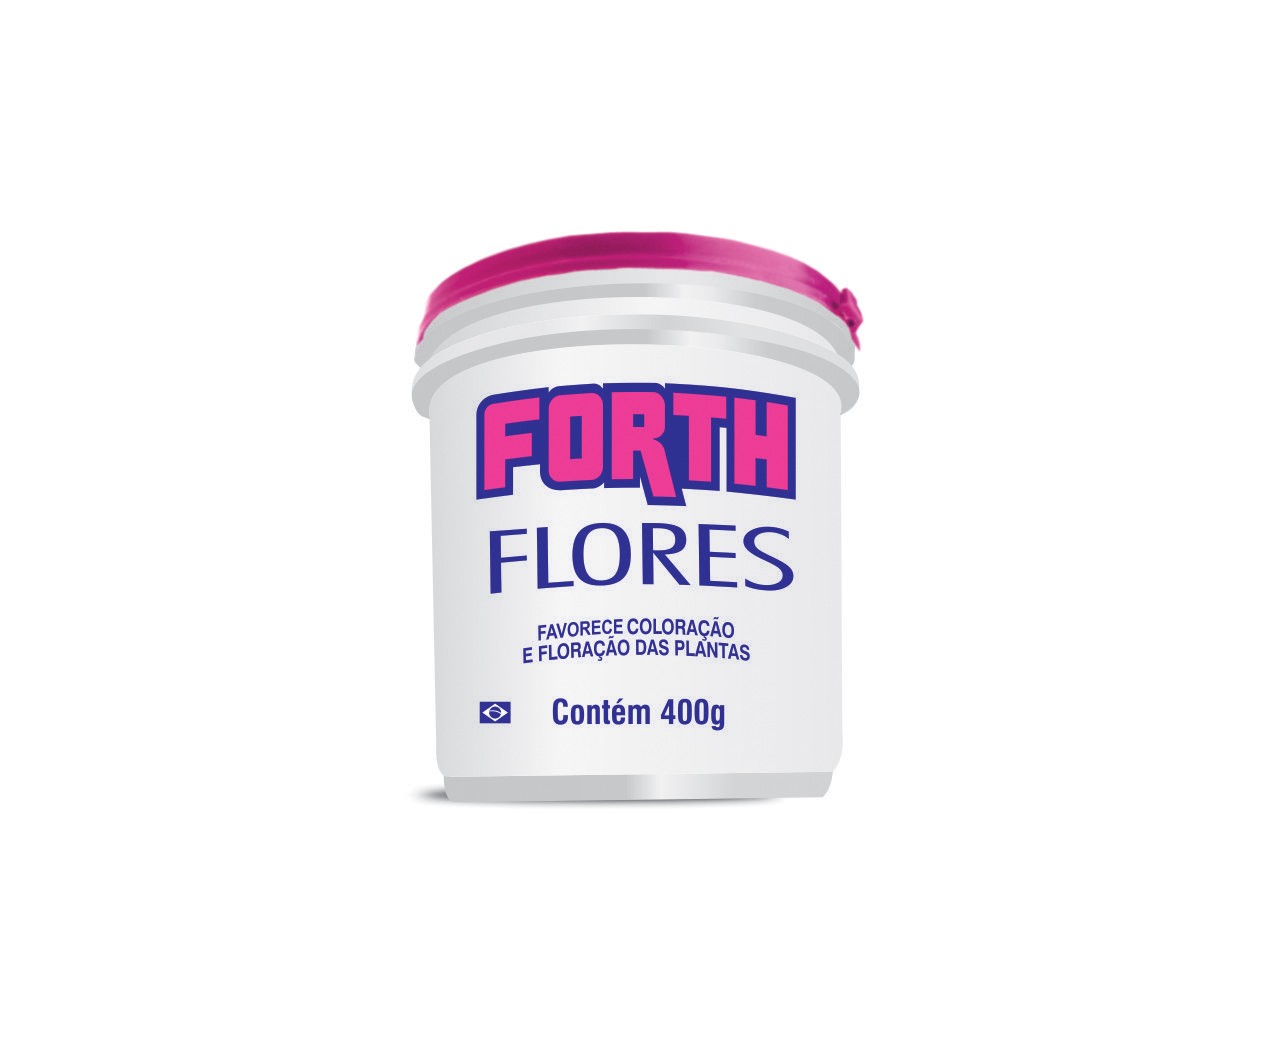 Forth Flores 400g